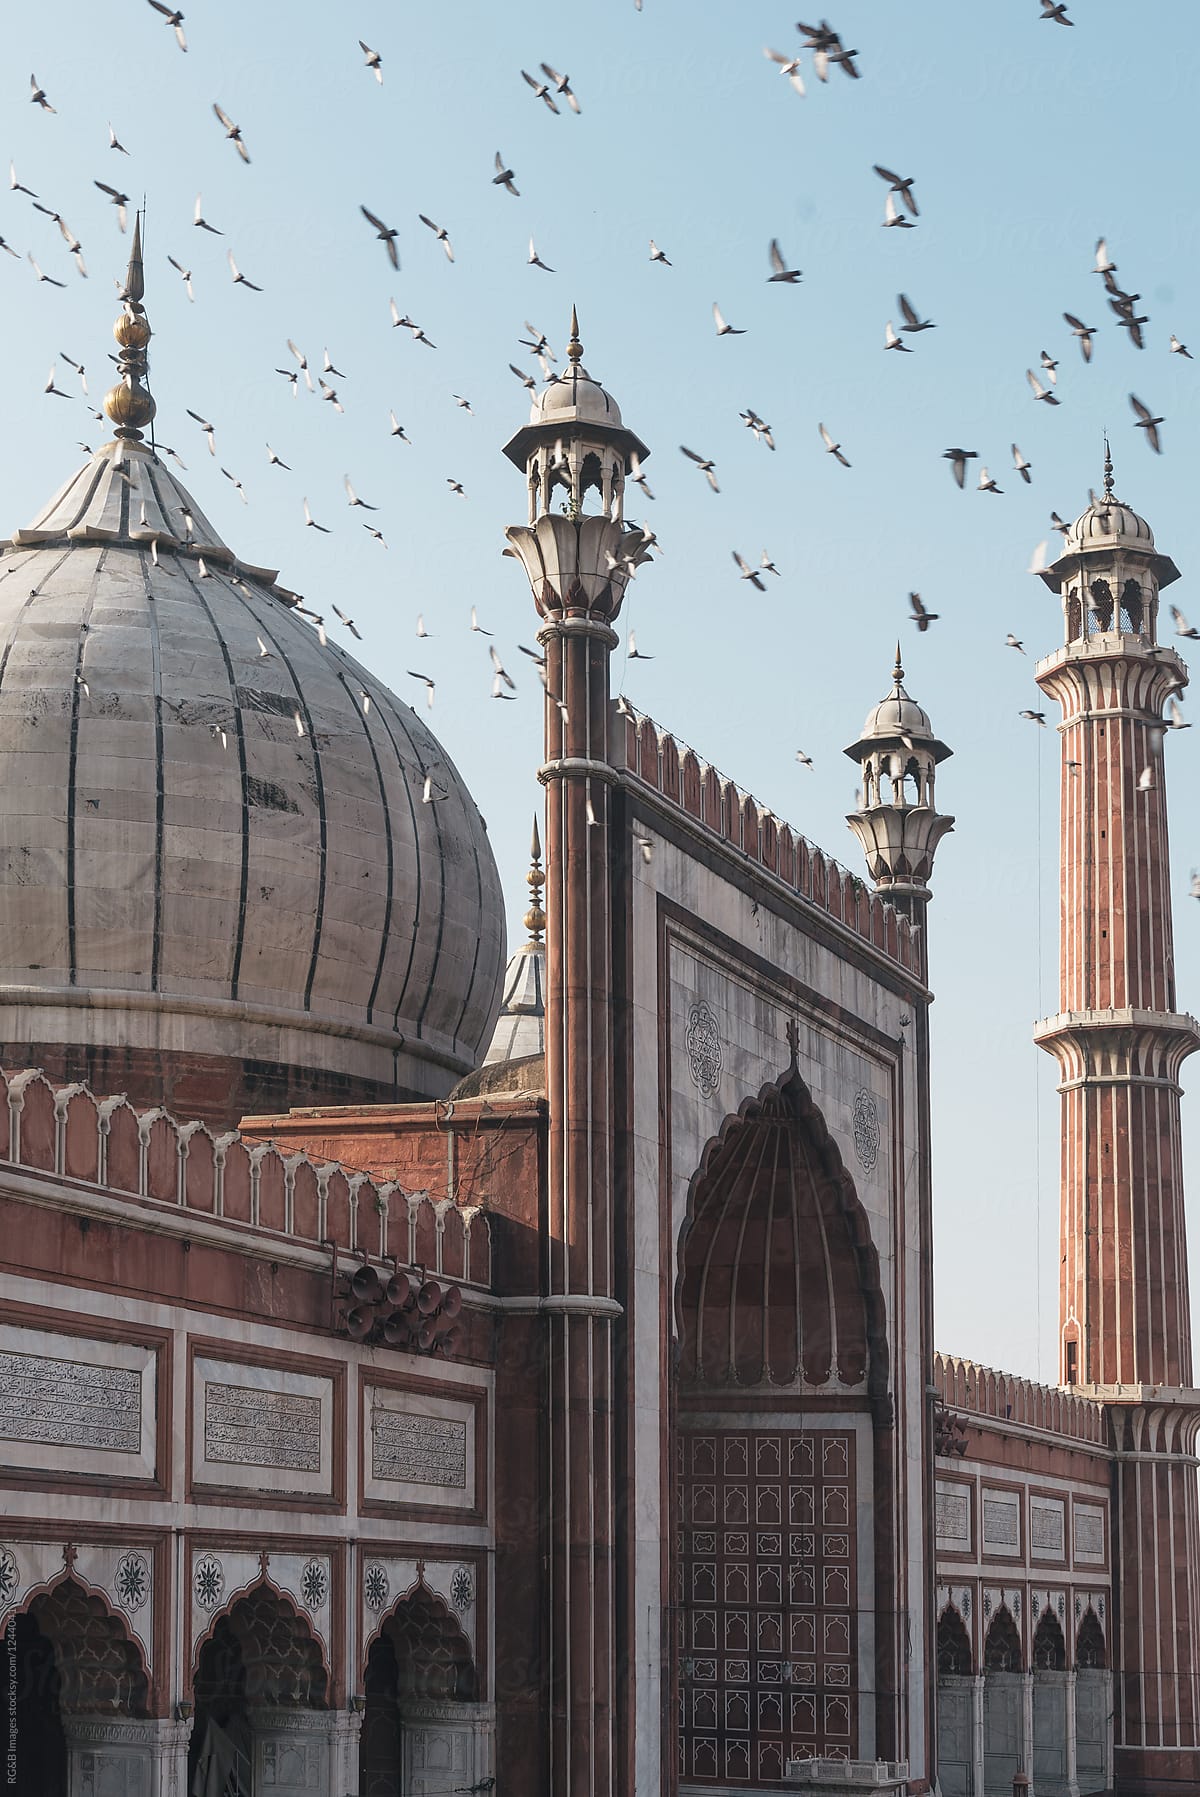 Flock of piegeons flying above ancient Jama Masjid mosque in India